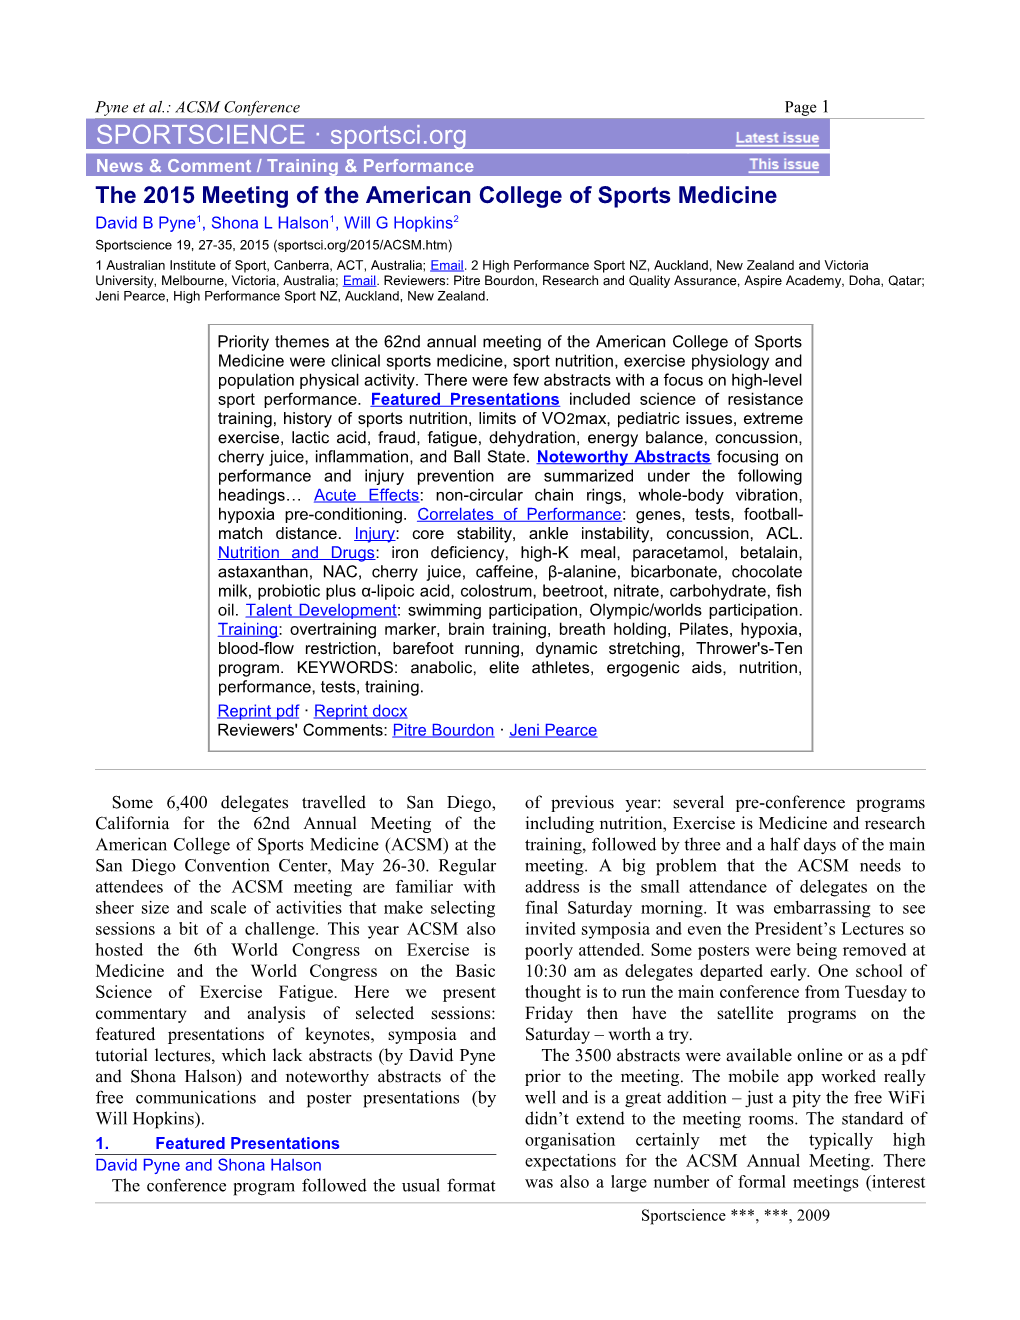 The 2015 Meeting of the American College of Sports Medicine